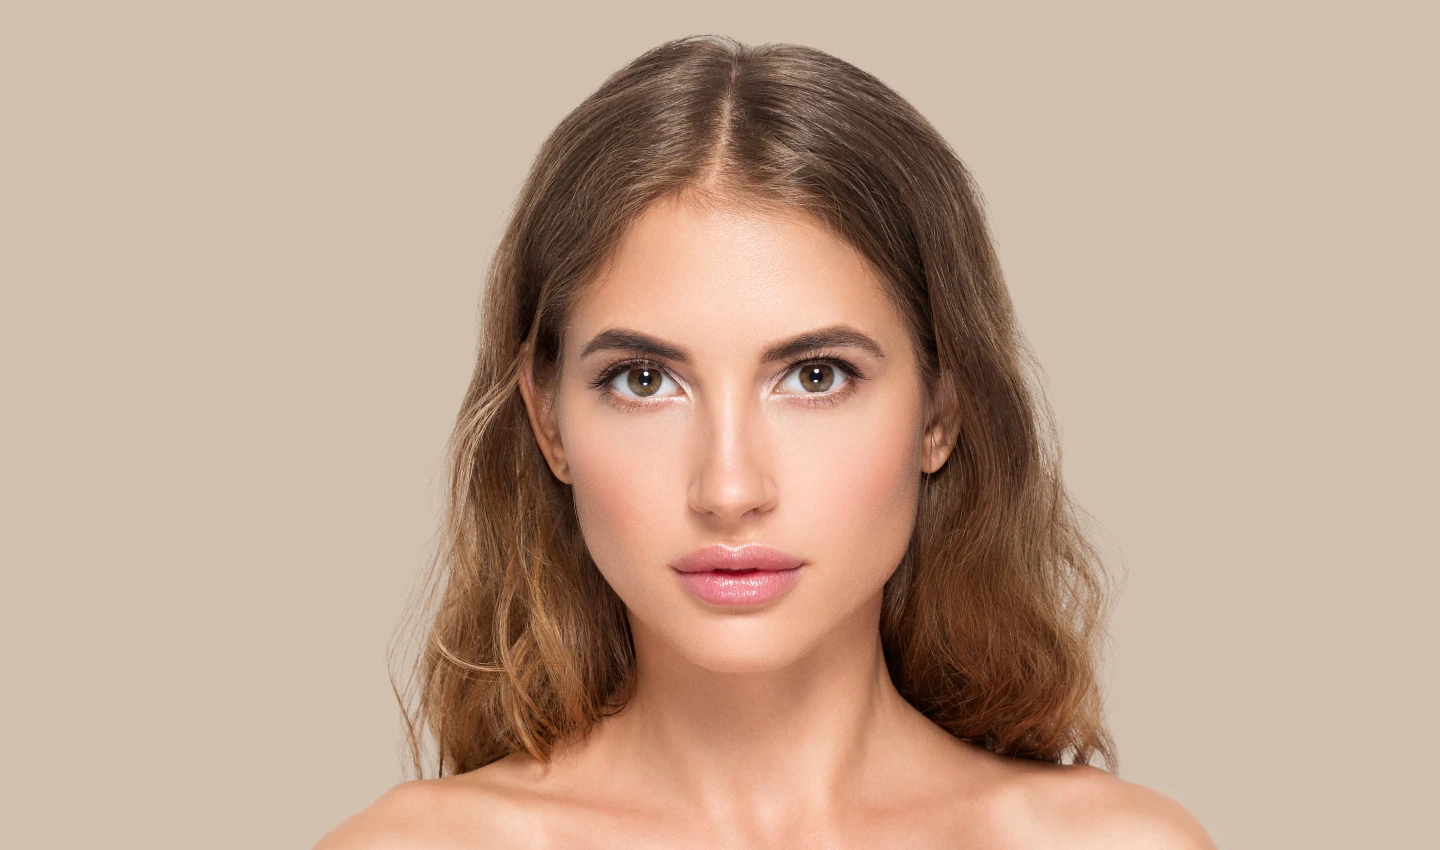 Image of a stunning young lady with a glowing skin and a fine jawline staring at the camera. The image represents the results that can be achieved by using Kybella to eliminate submental fat and achieve a desirable V-shaped face.